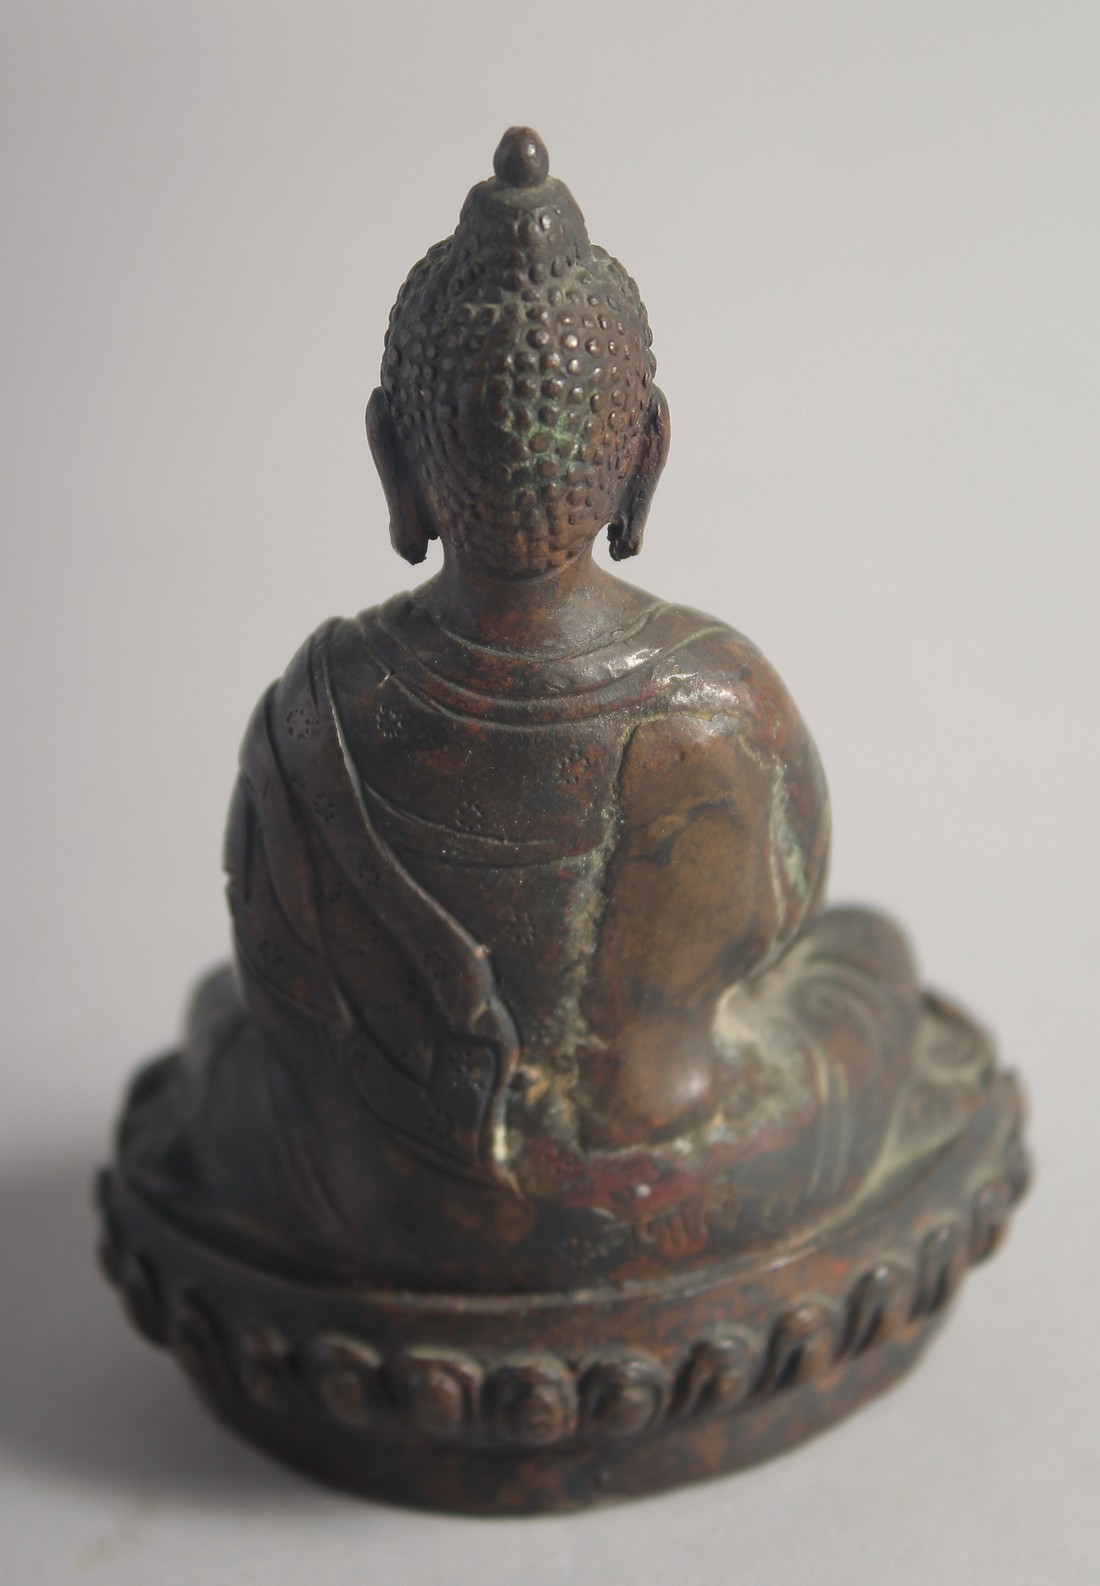 A FINE 18TH/19TH CENTURY INDIAN OR NEPALESE BRONZE BUDDHA, inscribed to the reverse. 10.5cm high - Image 2 of 3